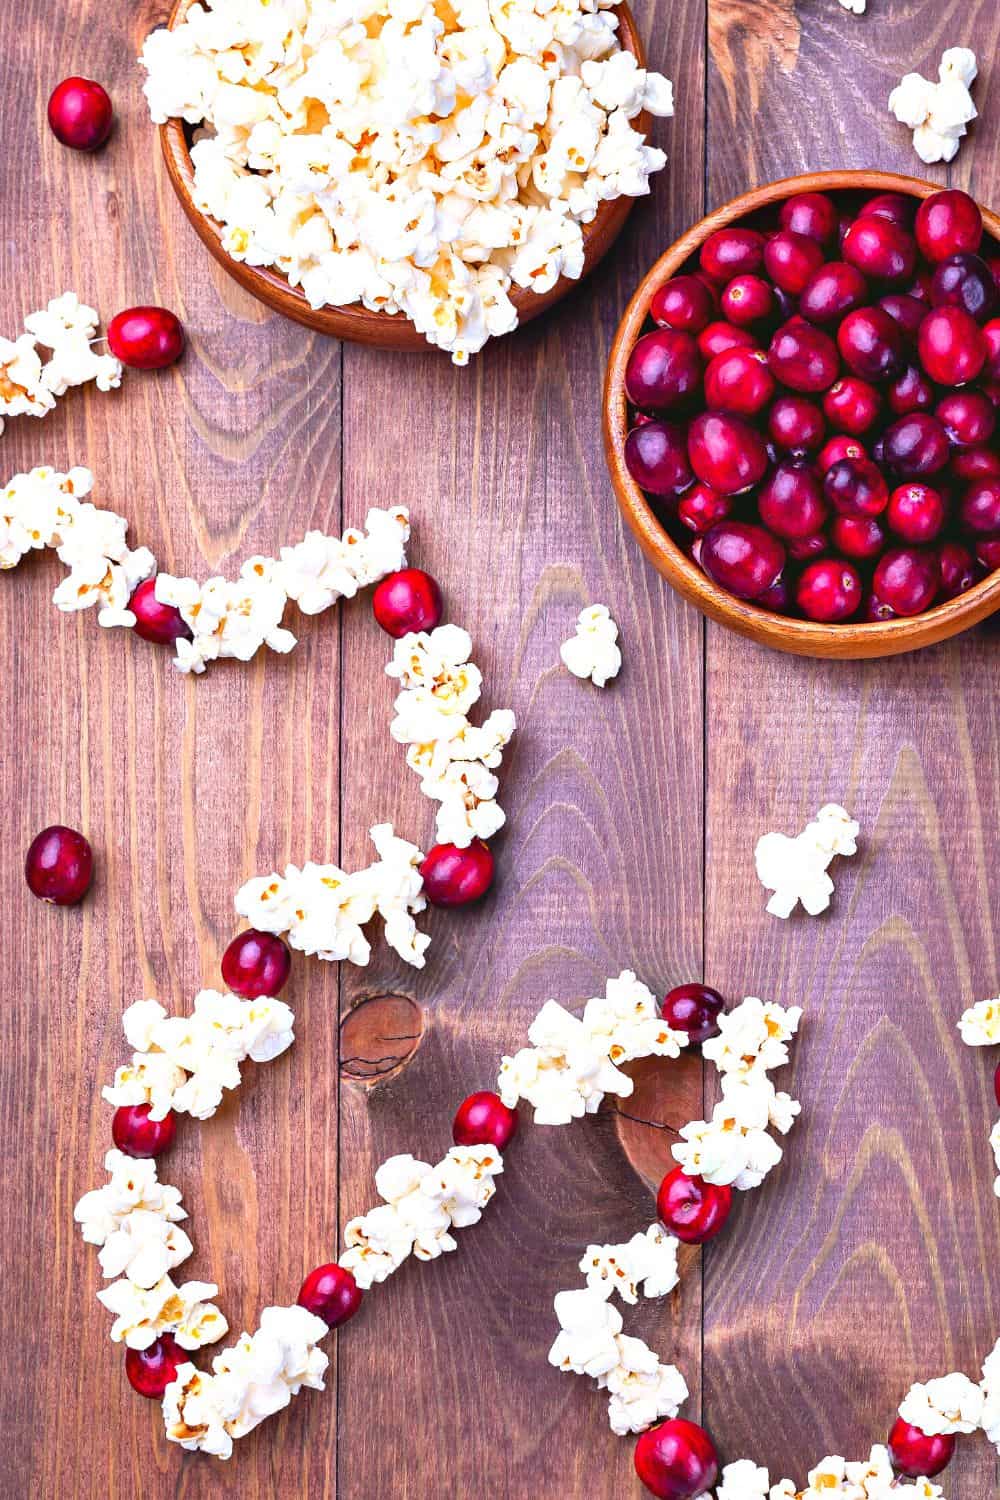 DIY Christmas tree cranberry garland with popcorn (how to make garlands for holidays and Christmas popcorn decorations)